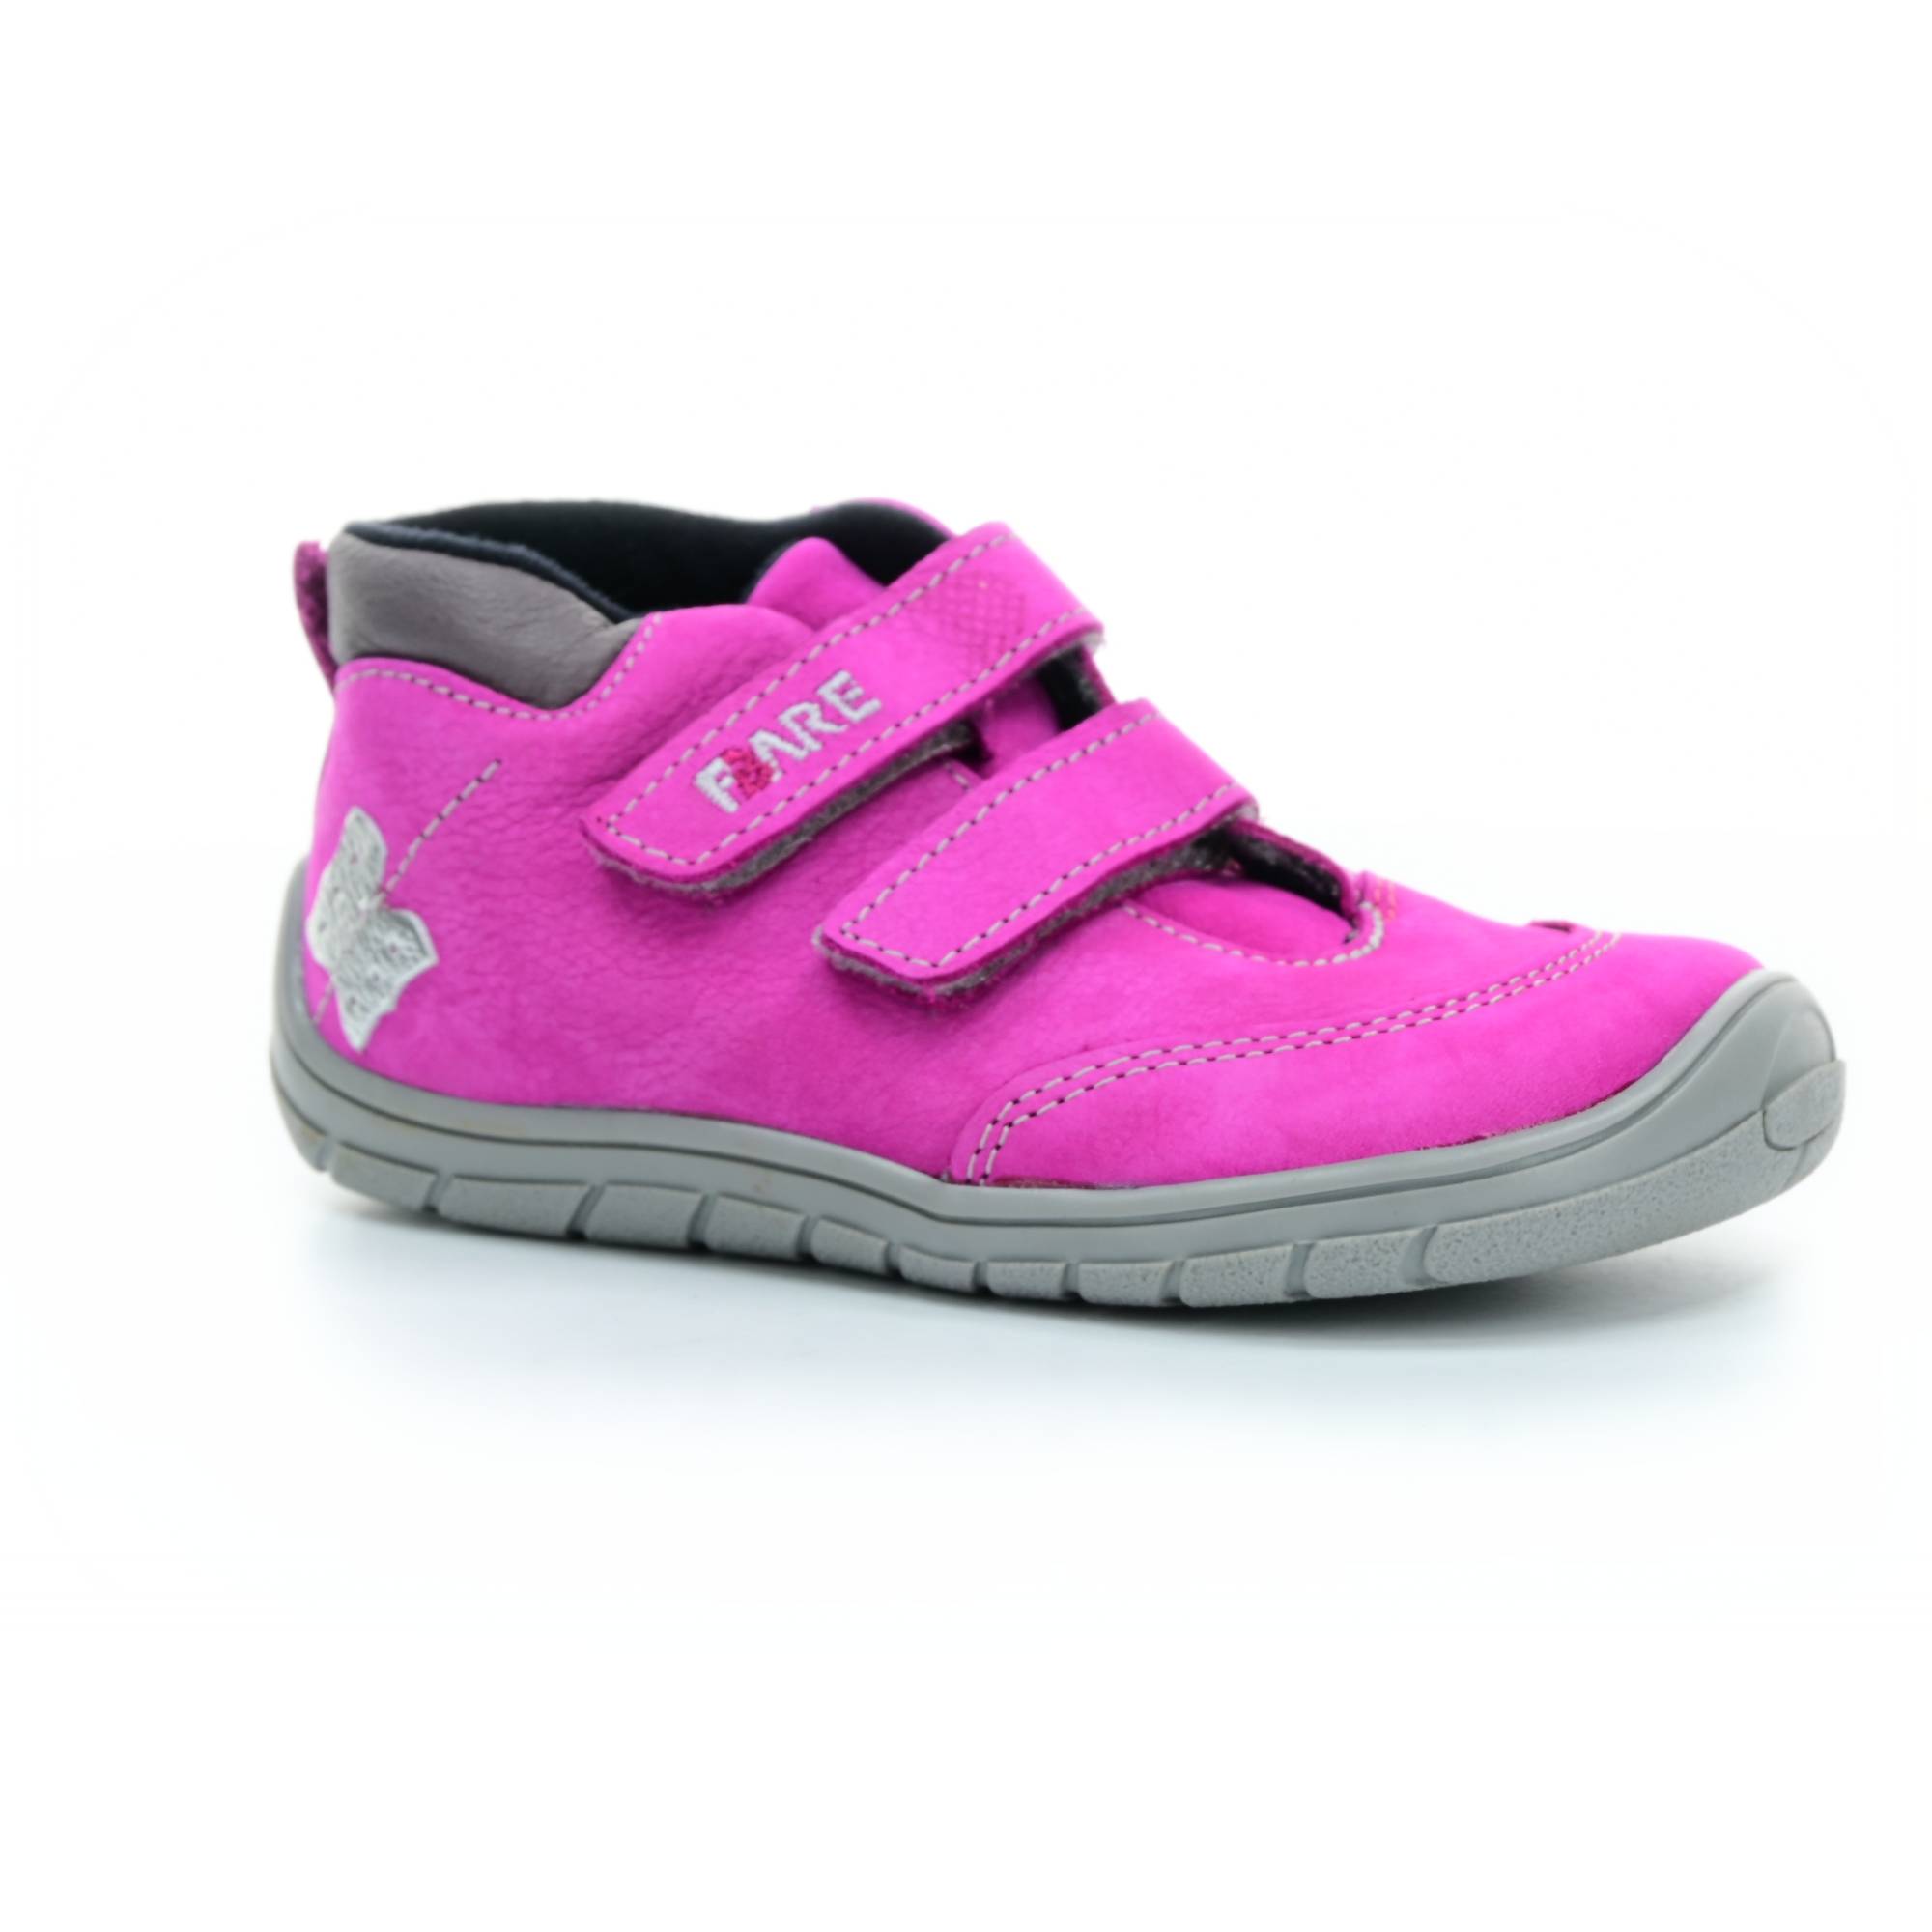 Fare B5421252 pink with butterfly high top barefoot shoes | www.footic.com